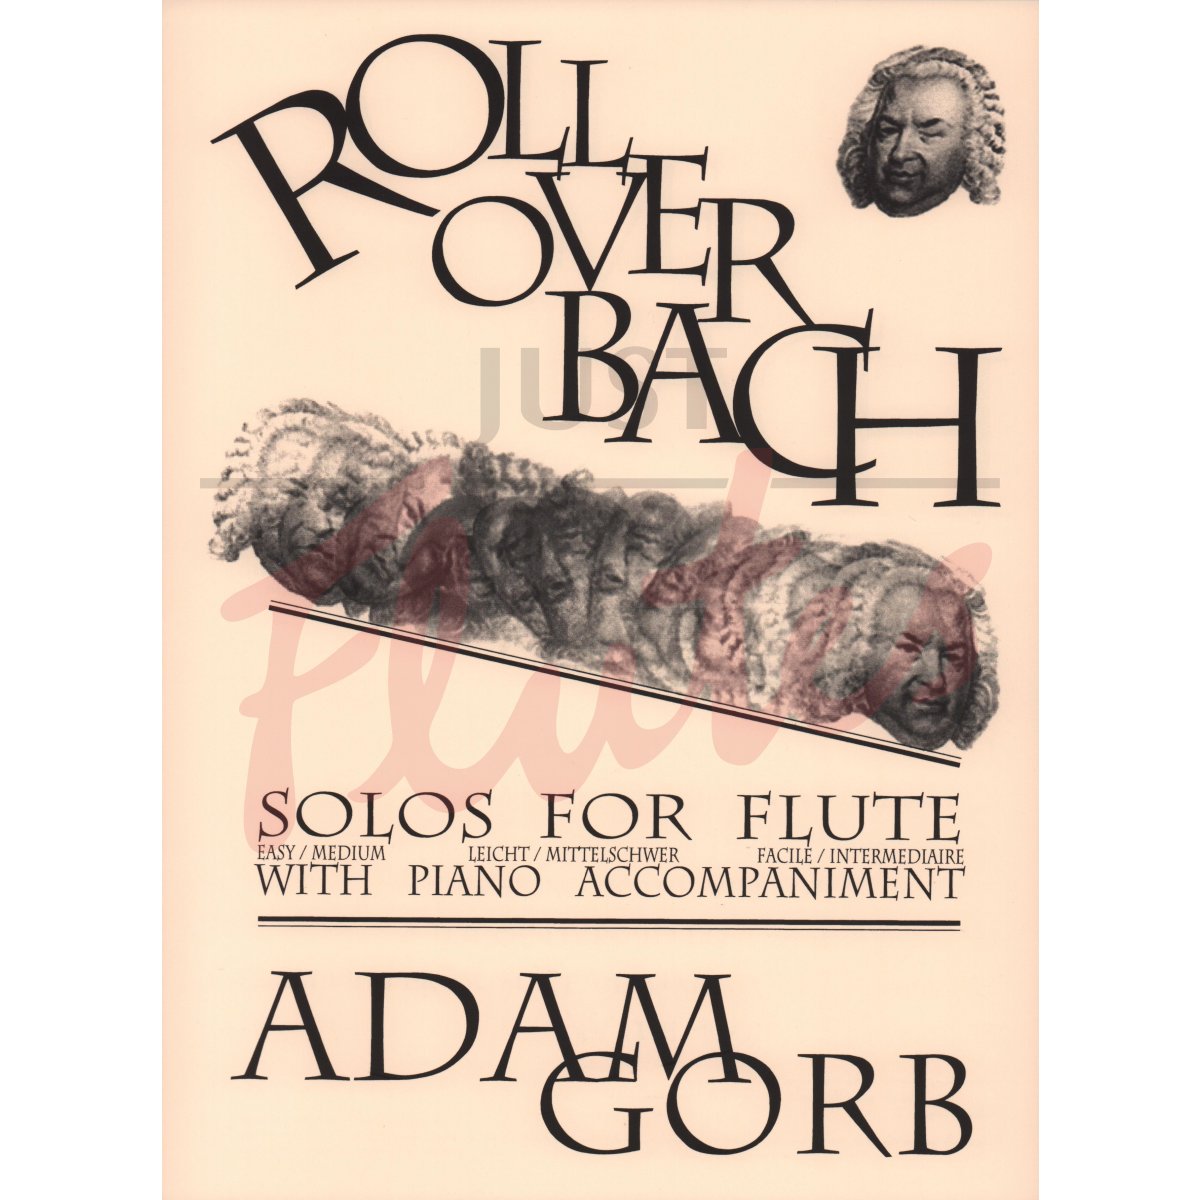 Roll Over Bach: Solos for Flute with Piano Accompaniment